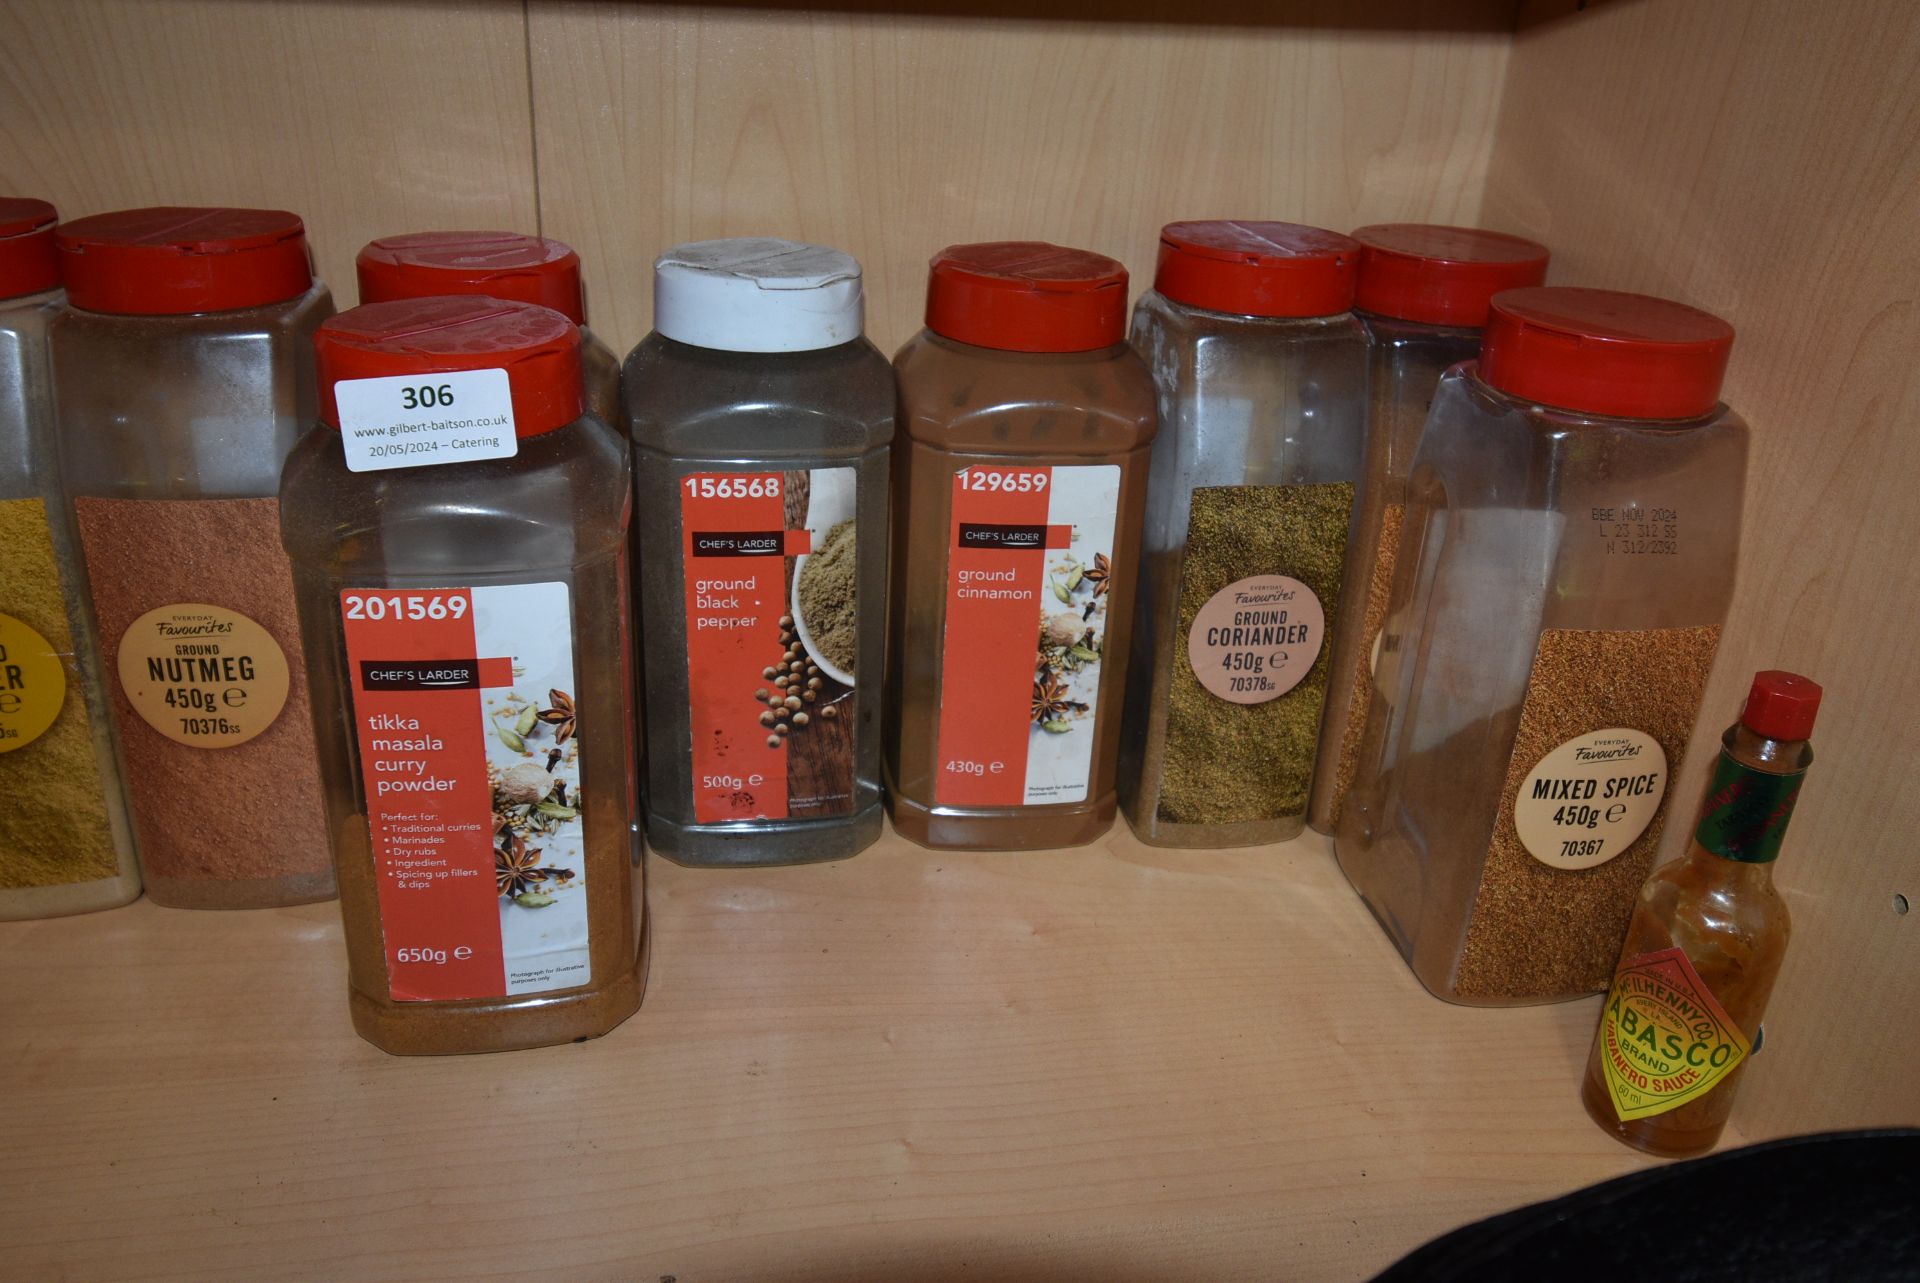 Contents of Shelf to Include Assorted Spices Including Black Pepper, Nutmeg, Ginger, etc. - Image 3 of 3